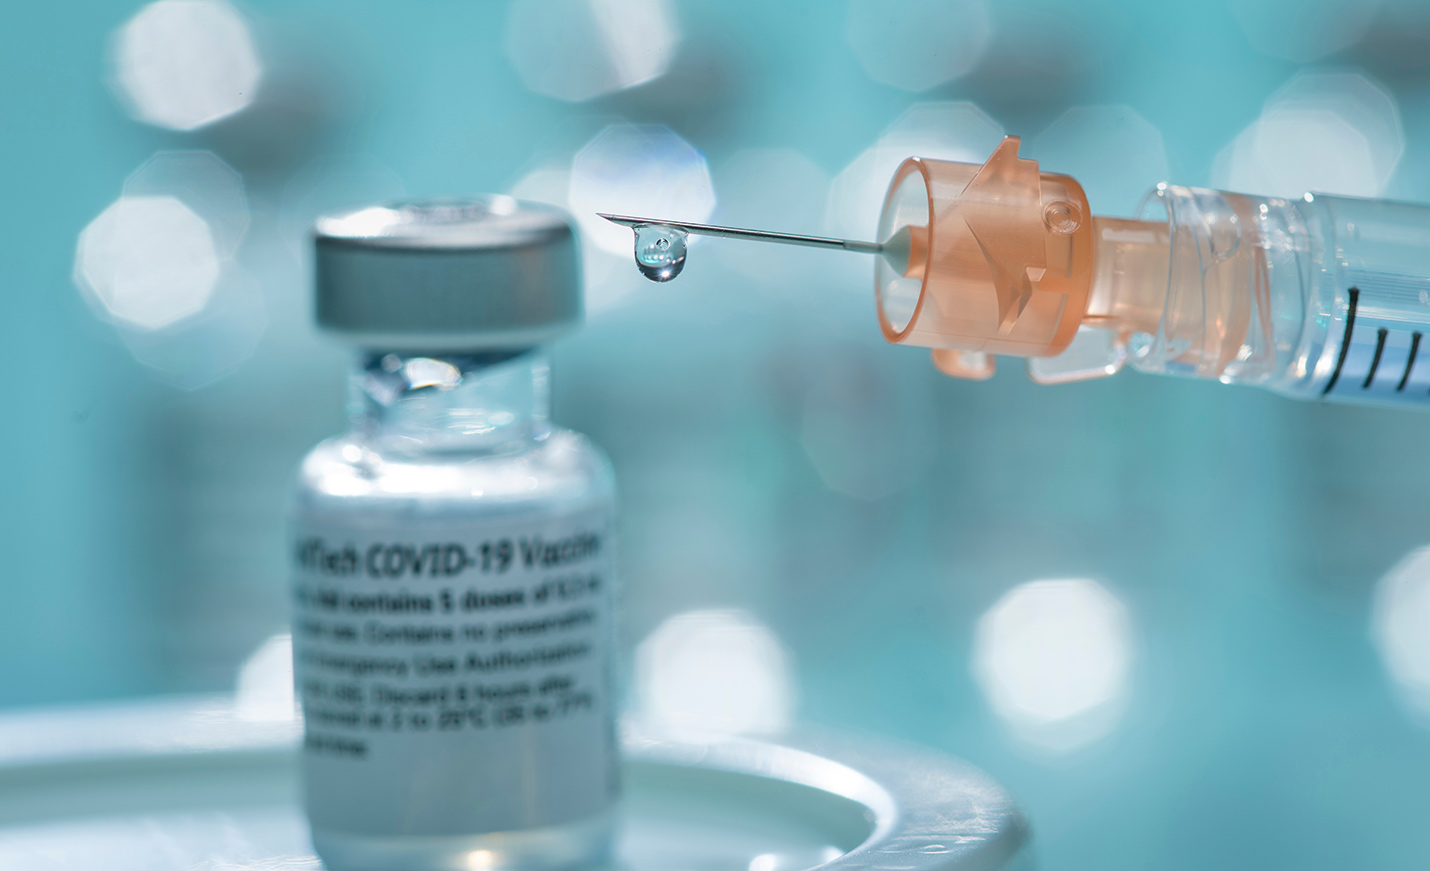 Close-up image of a vial of COVID-19 vaccine